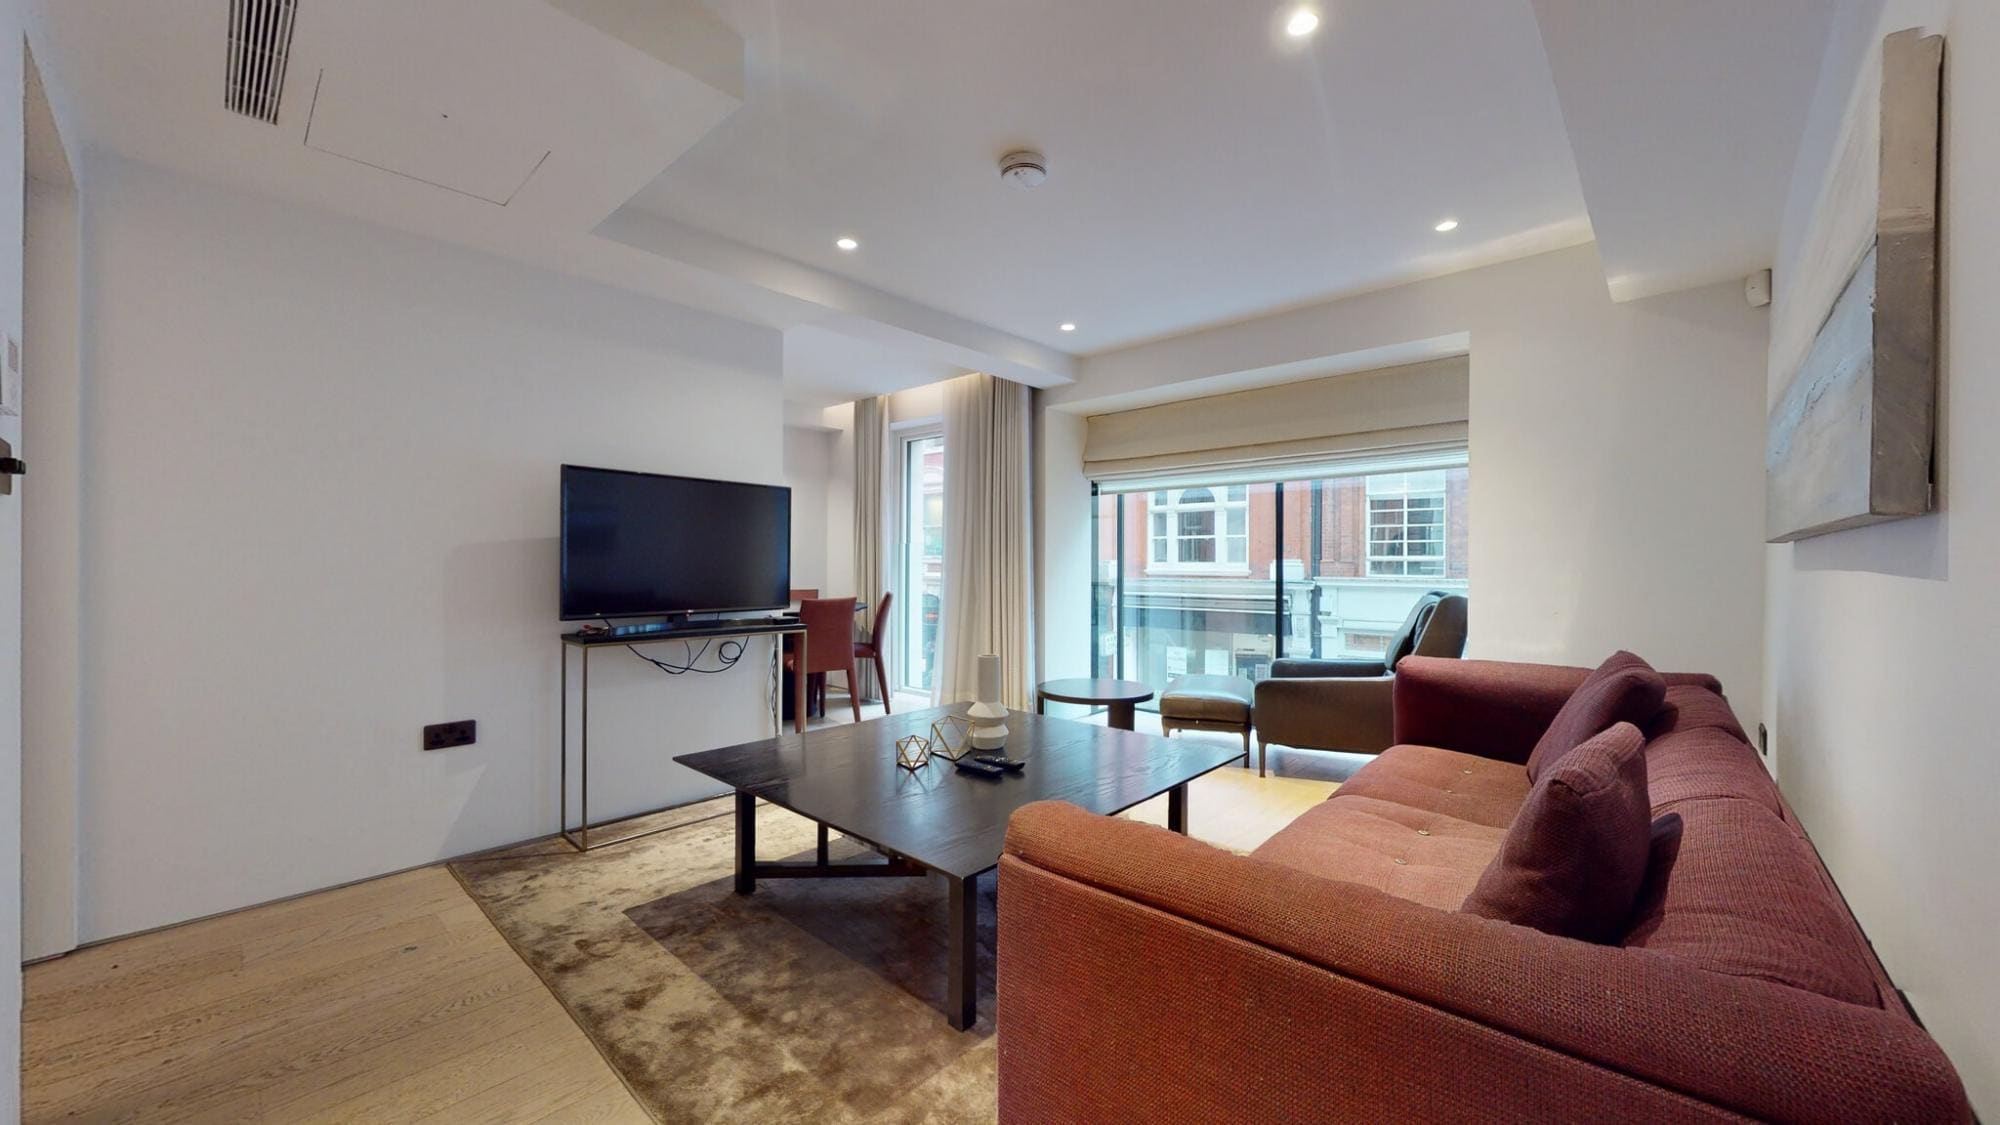 Property Image 2 - Maddox Street - 2 bed